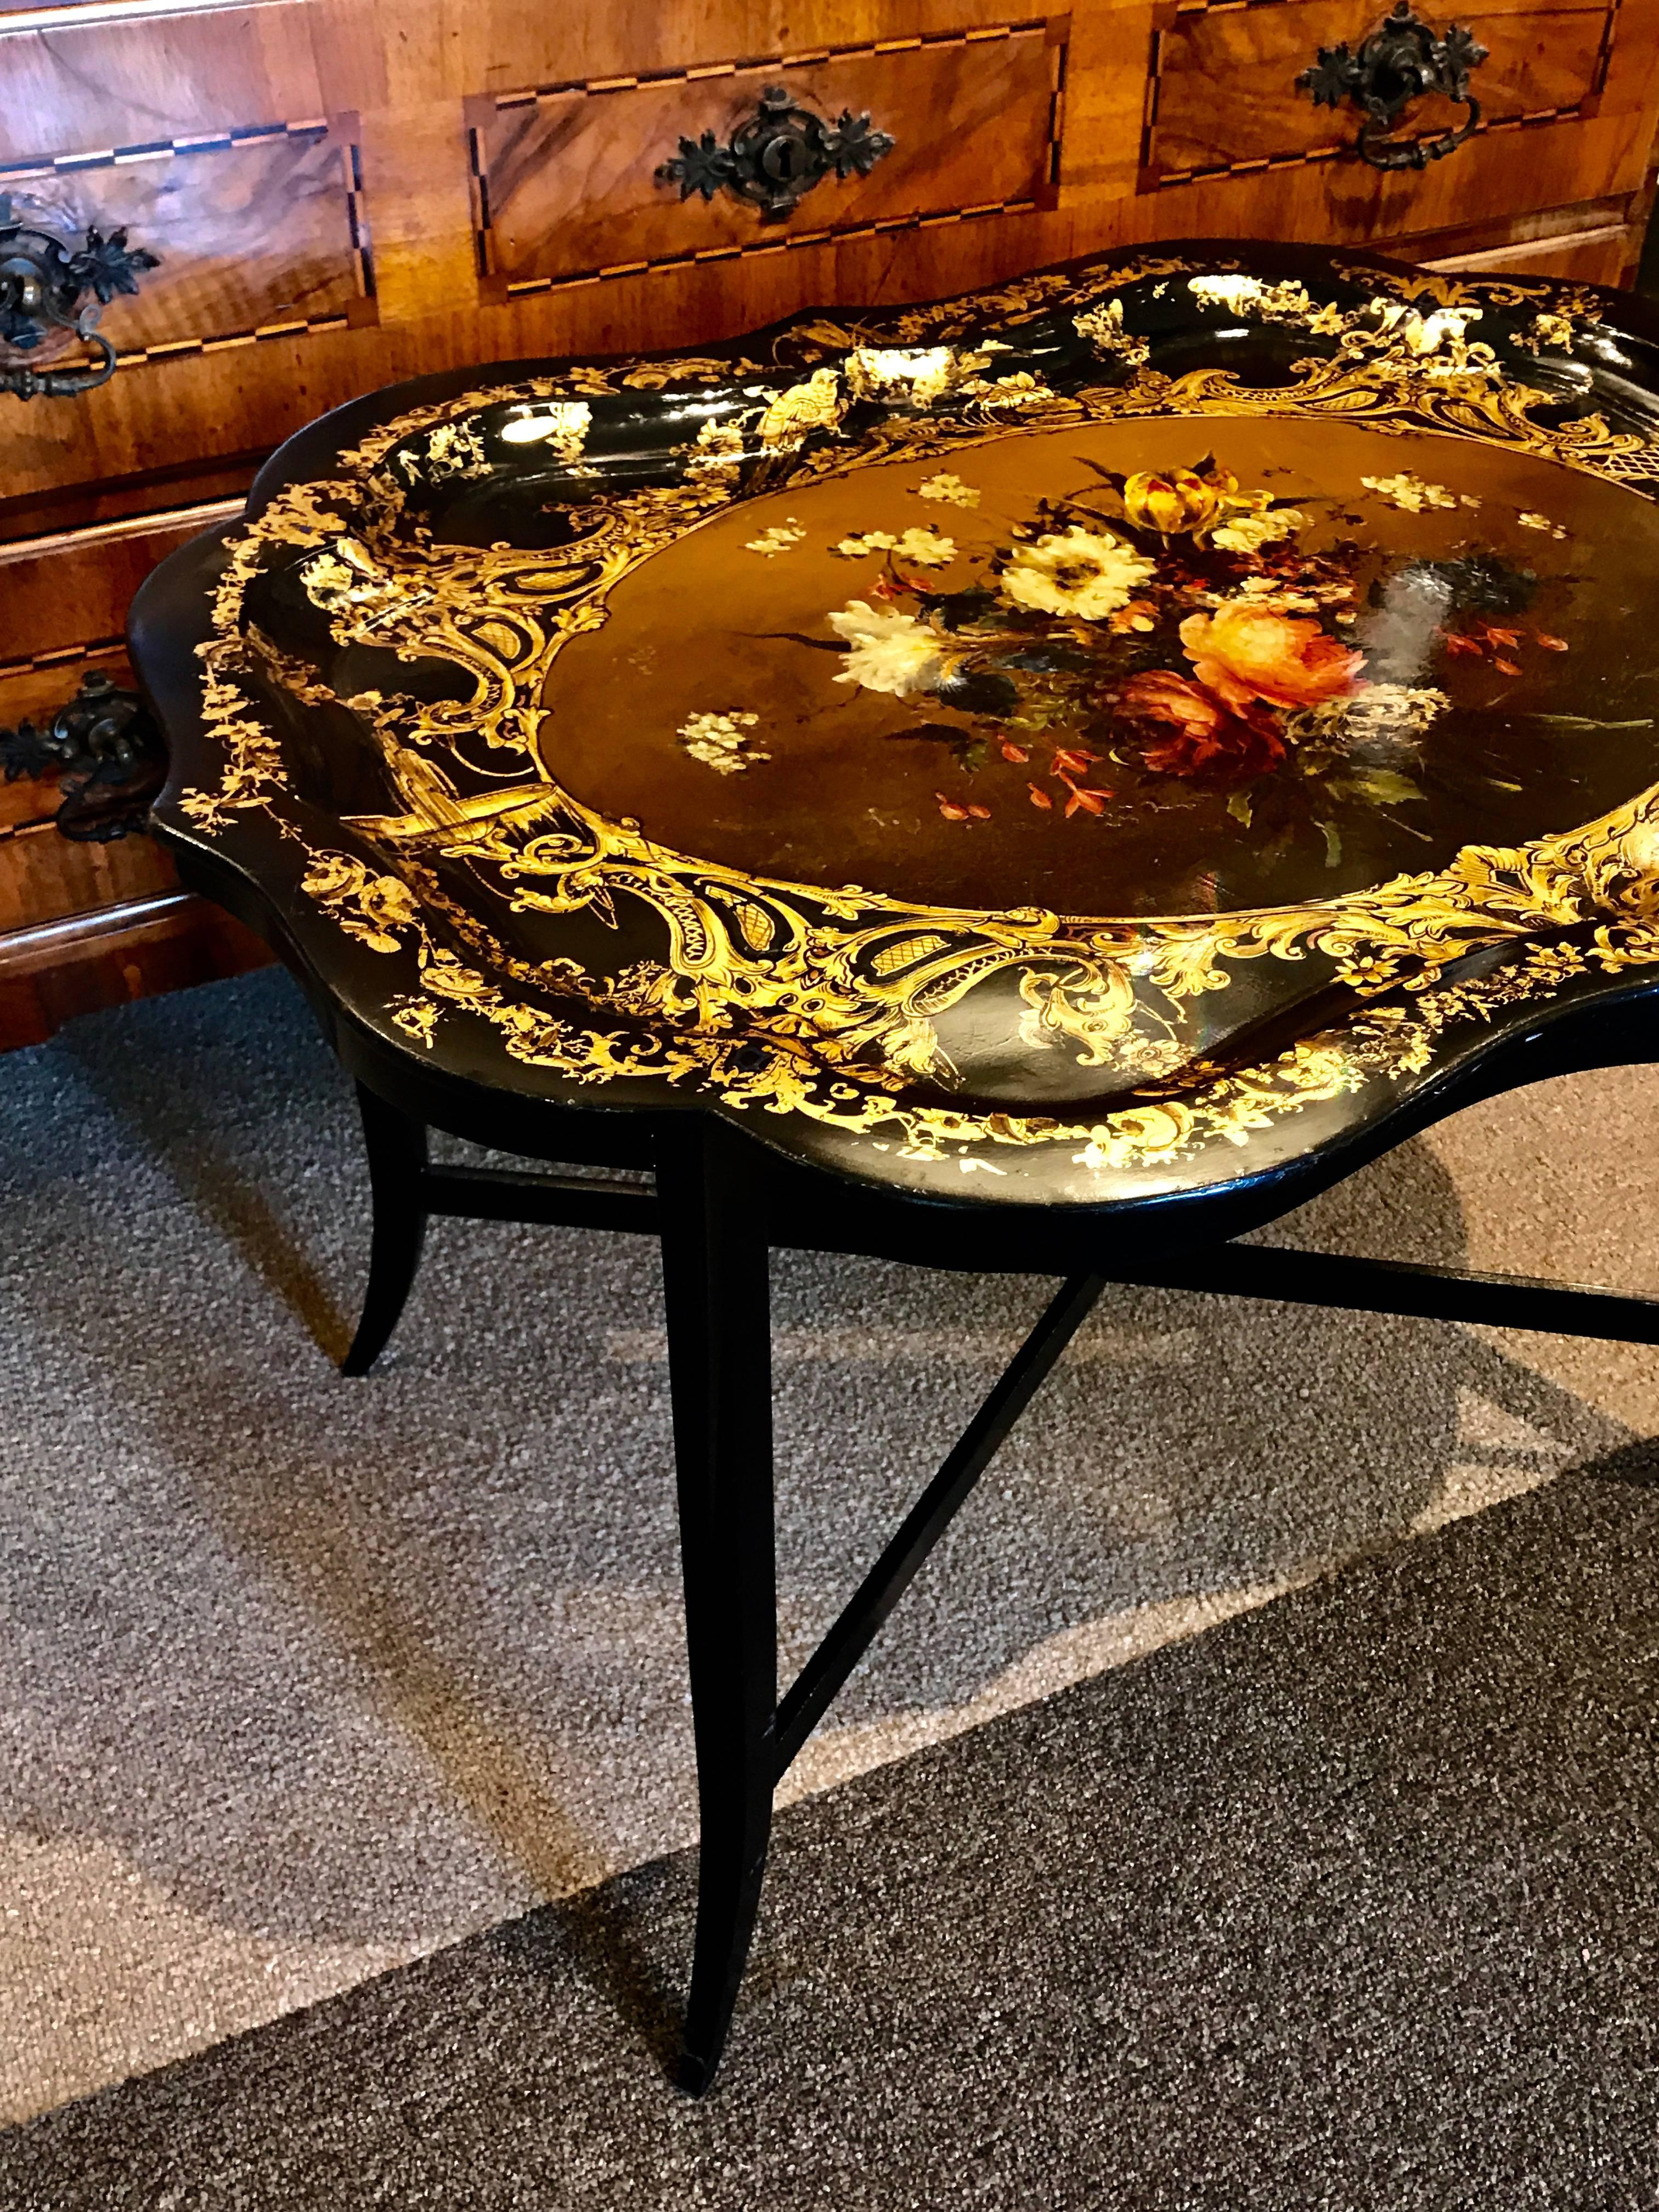 High Victorian Stunning 19th Century English Papier Mâché Gilt Floral Tray, Now as a Table